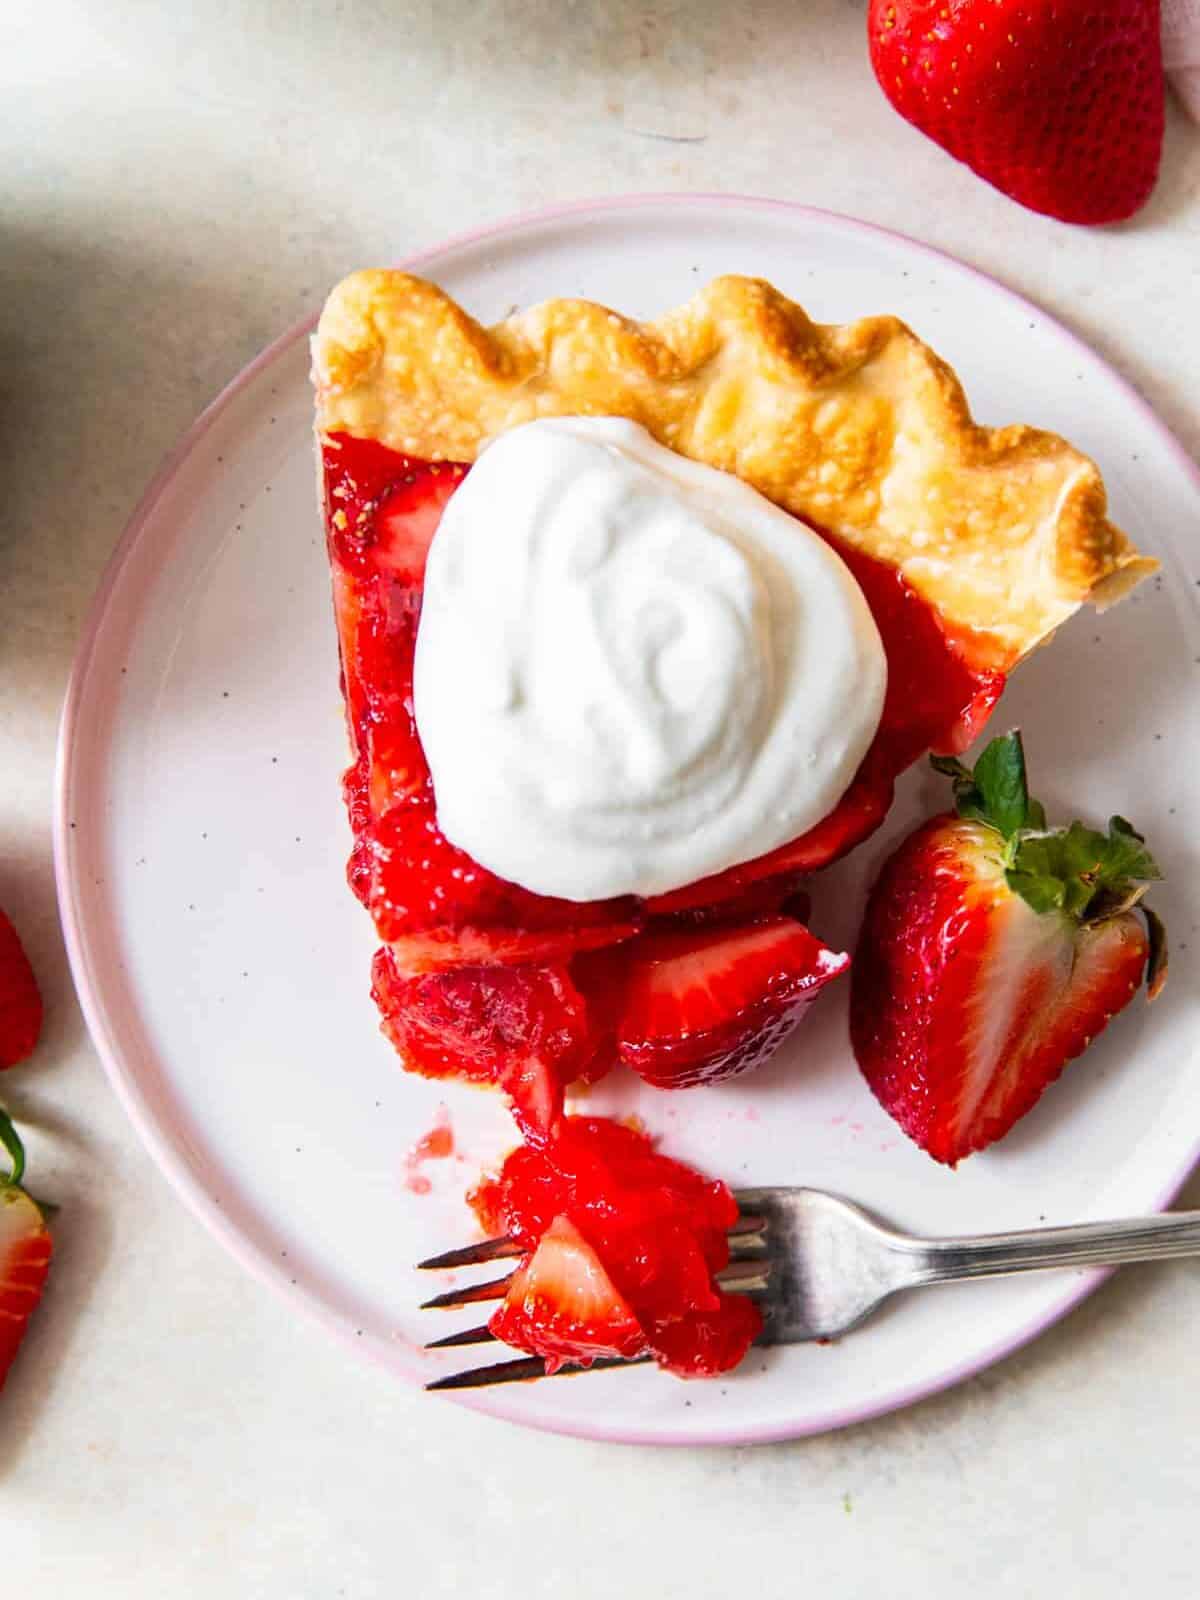 up close slice of strawberry jello pie with whipped cream